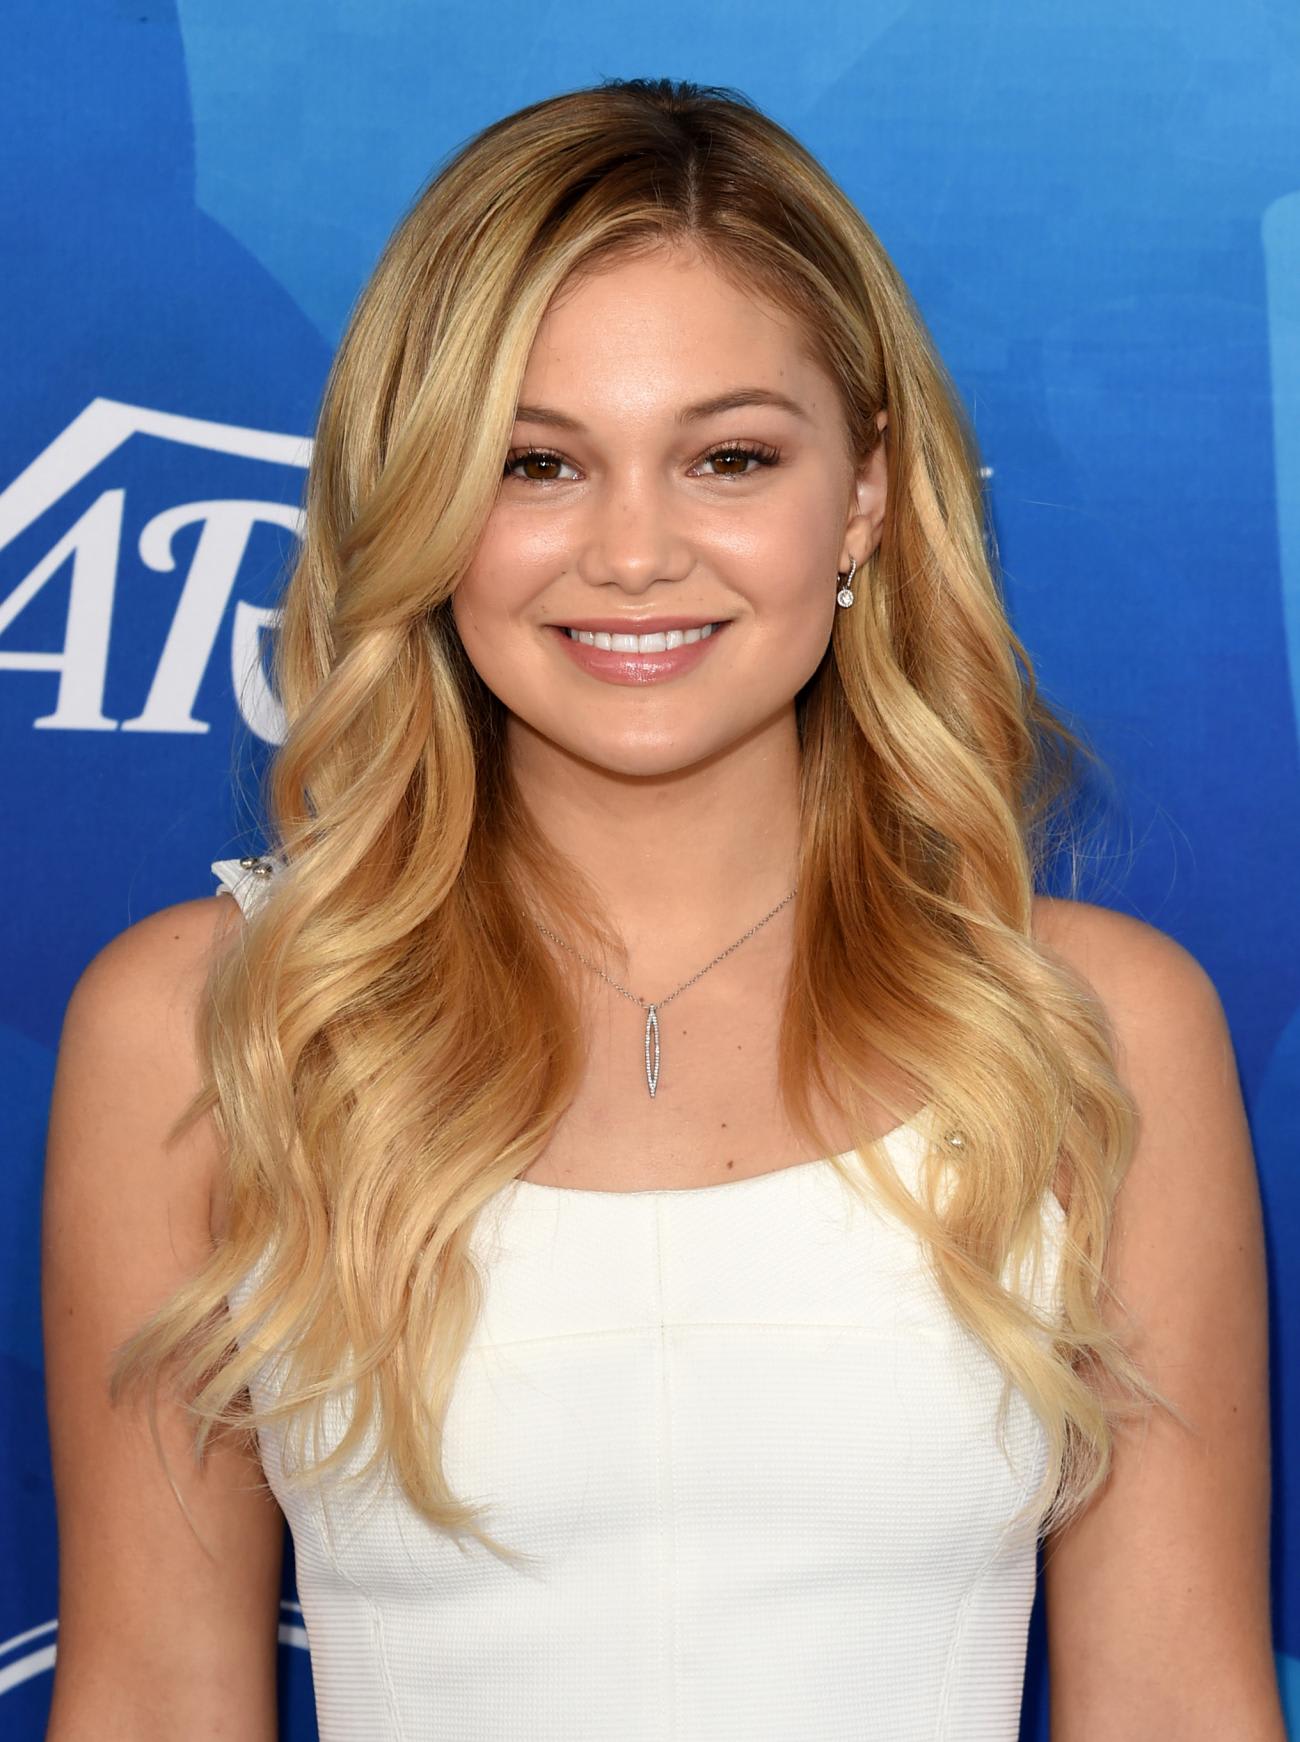 Olivia Holt Wwd And Variety S Stylemakers Event November 19 15 Favorite Celebrity Pictures